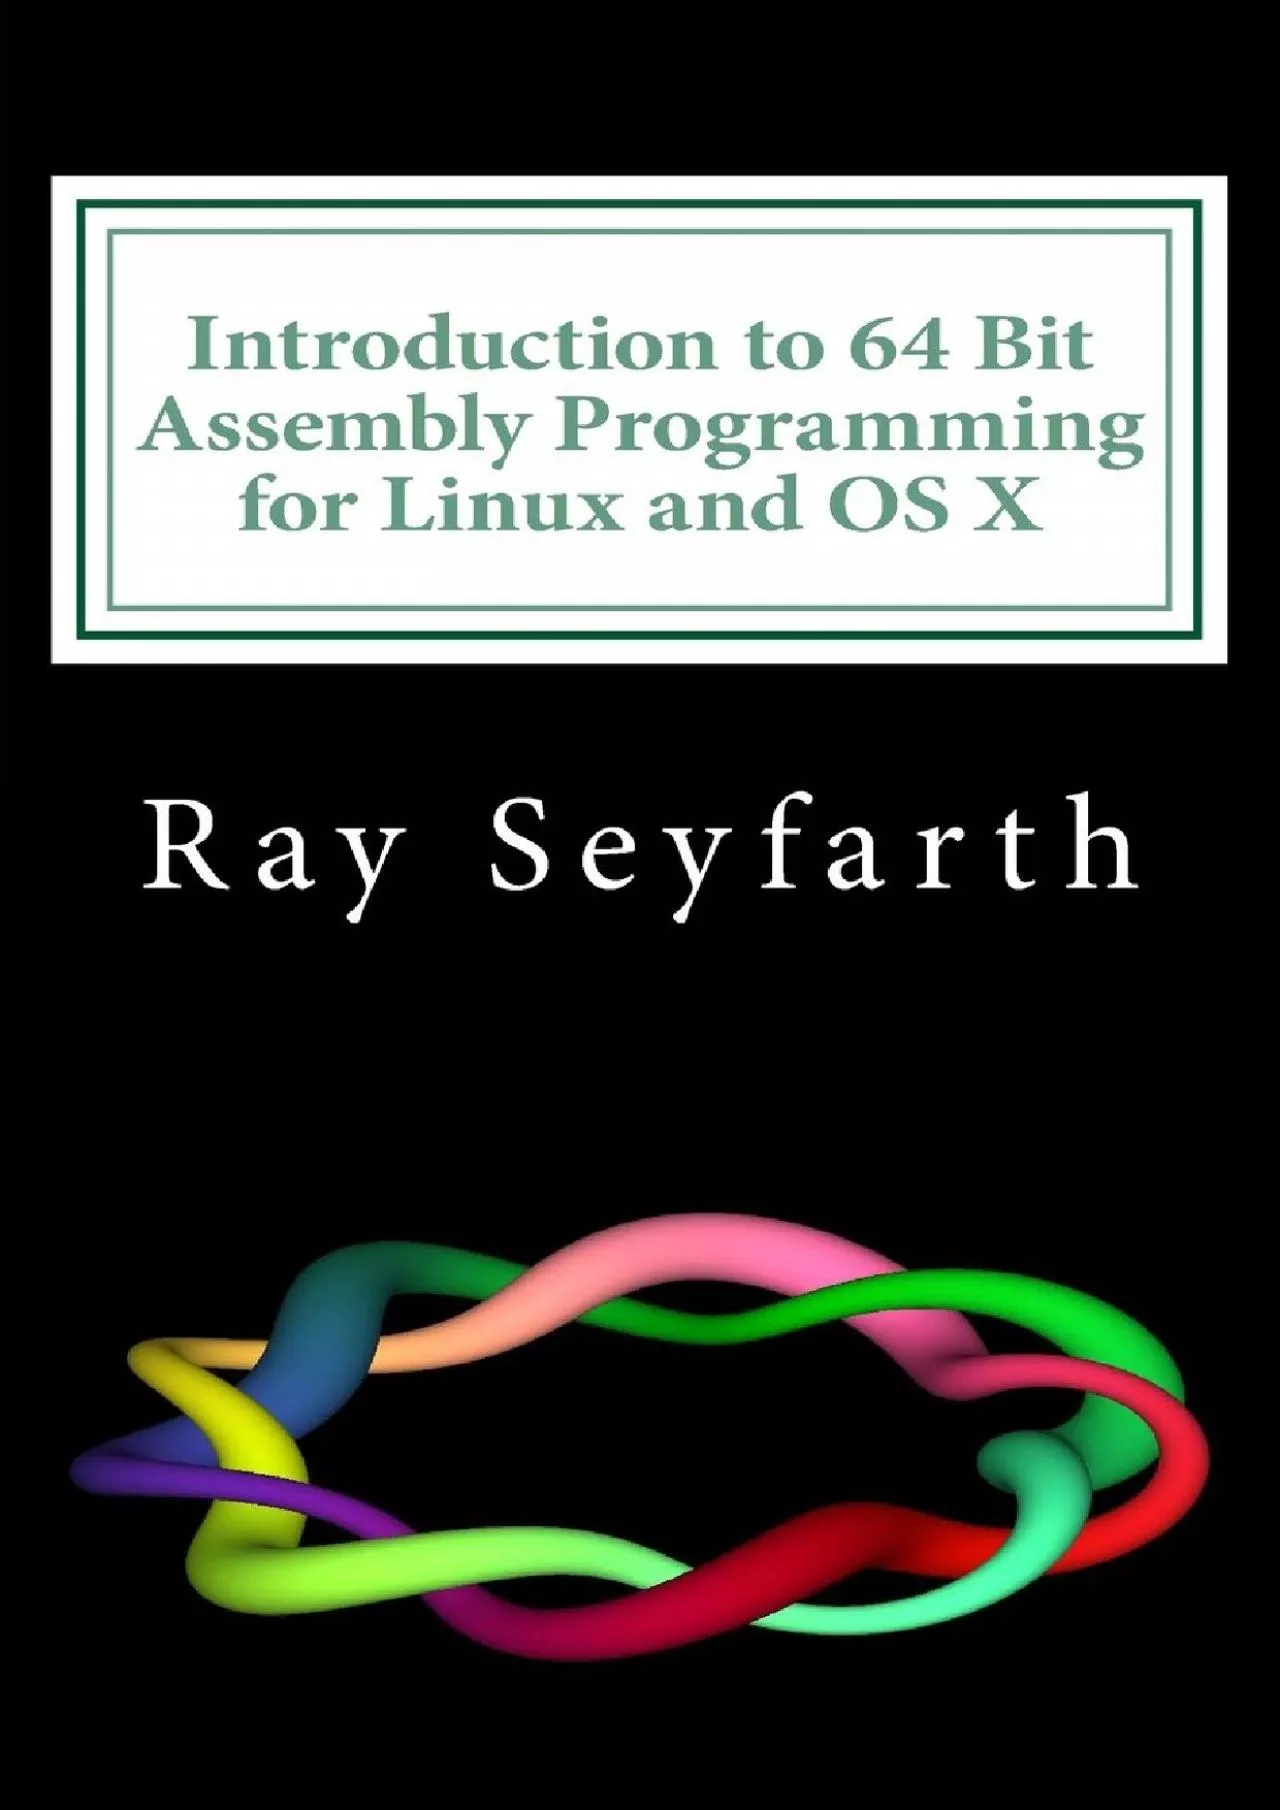 [FREE]-Introduction to 64 Bit Assembly Programming for Linux and OS X: For Linux and OS